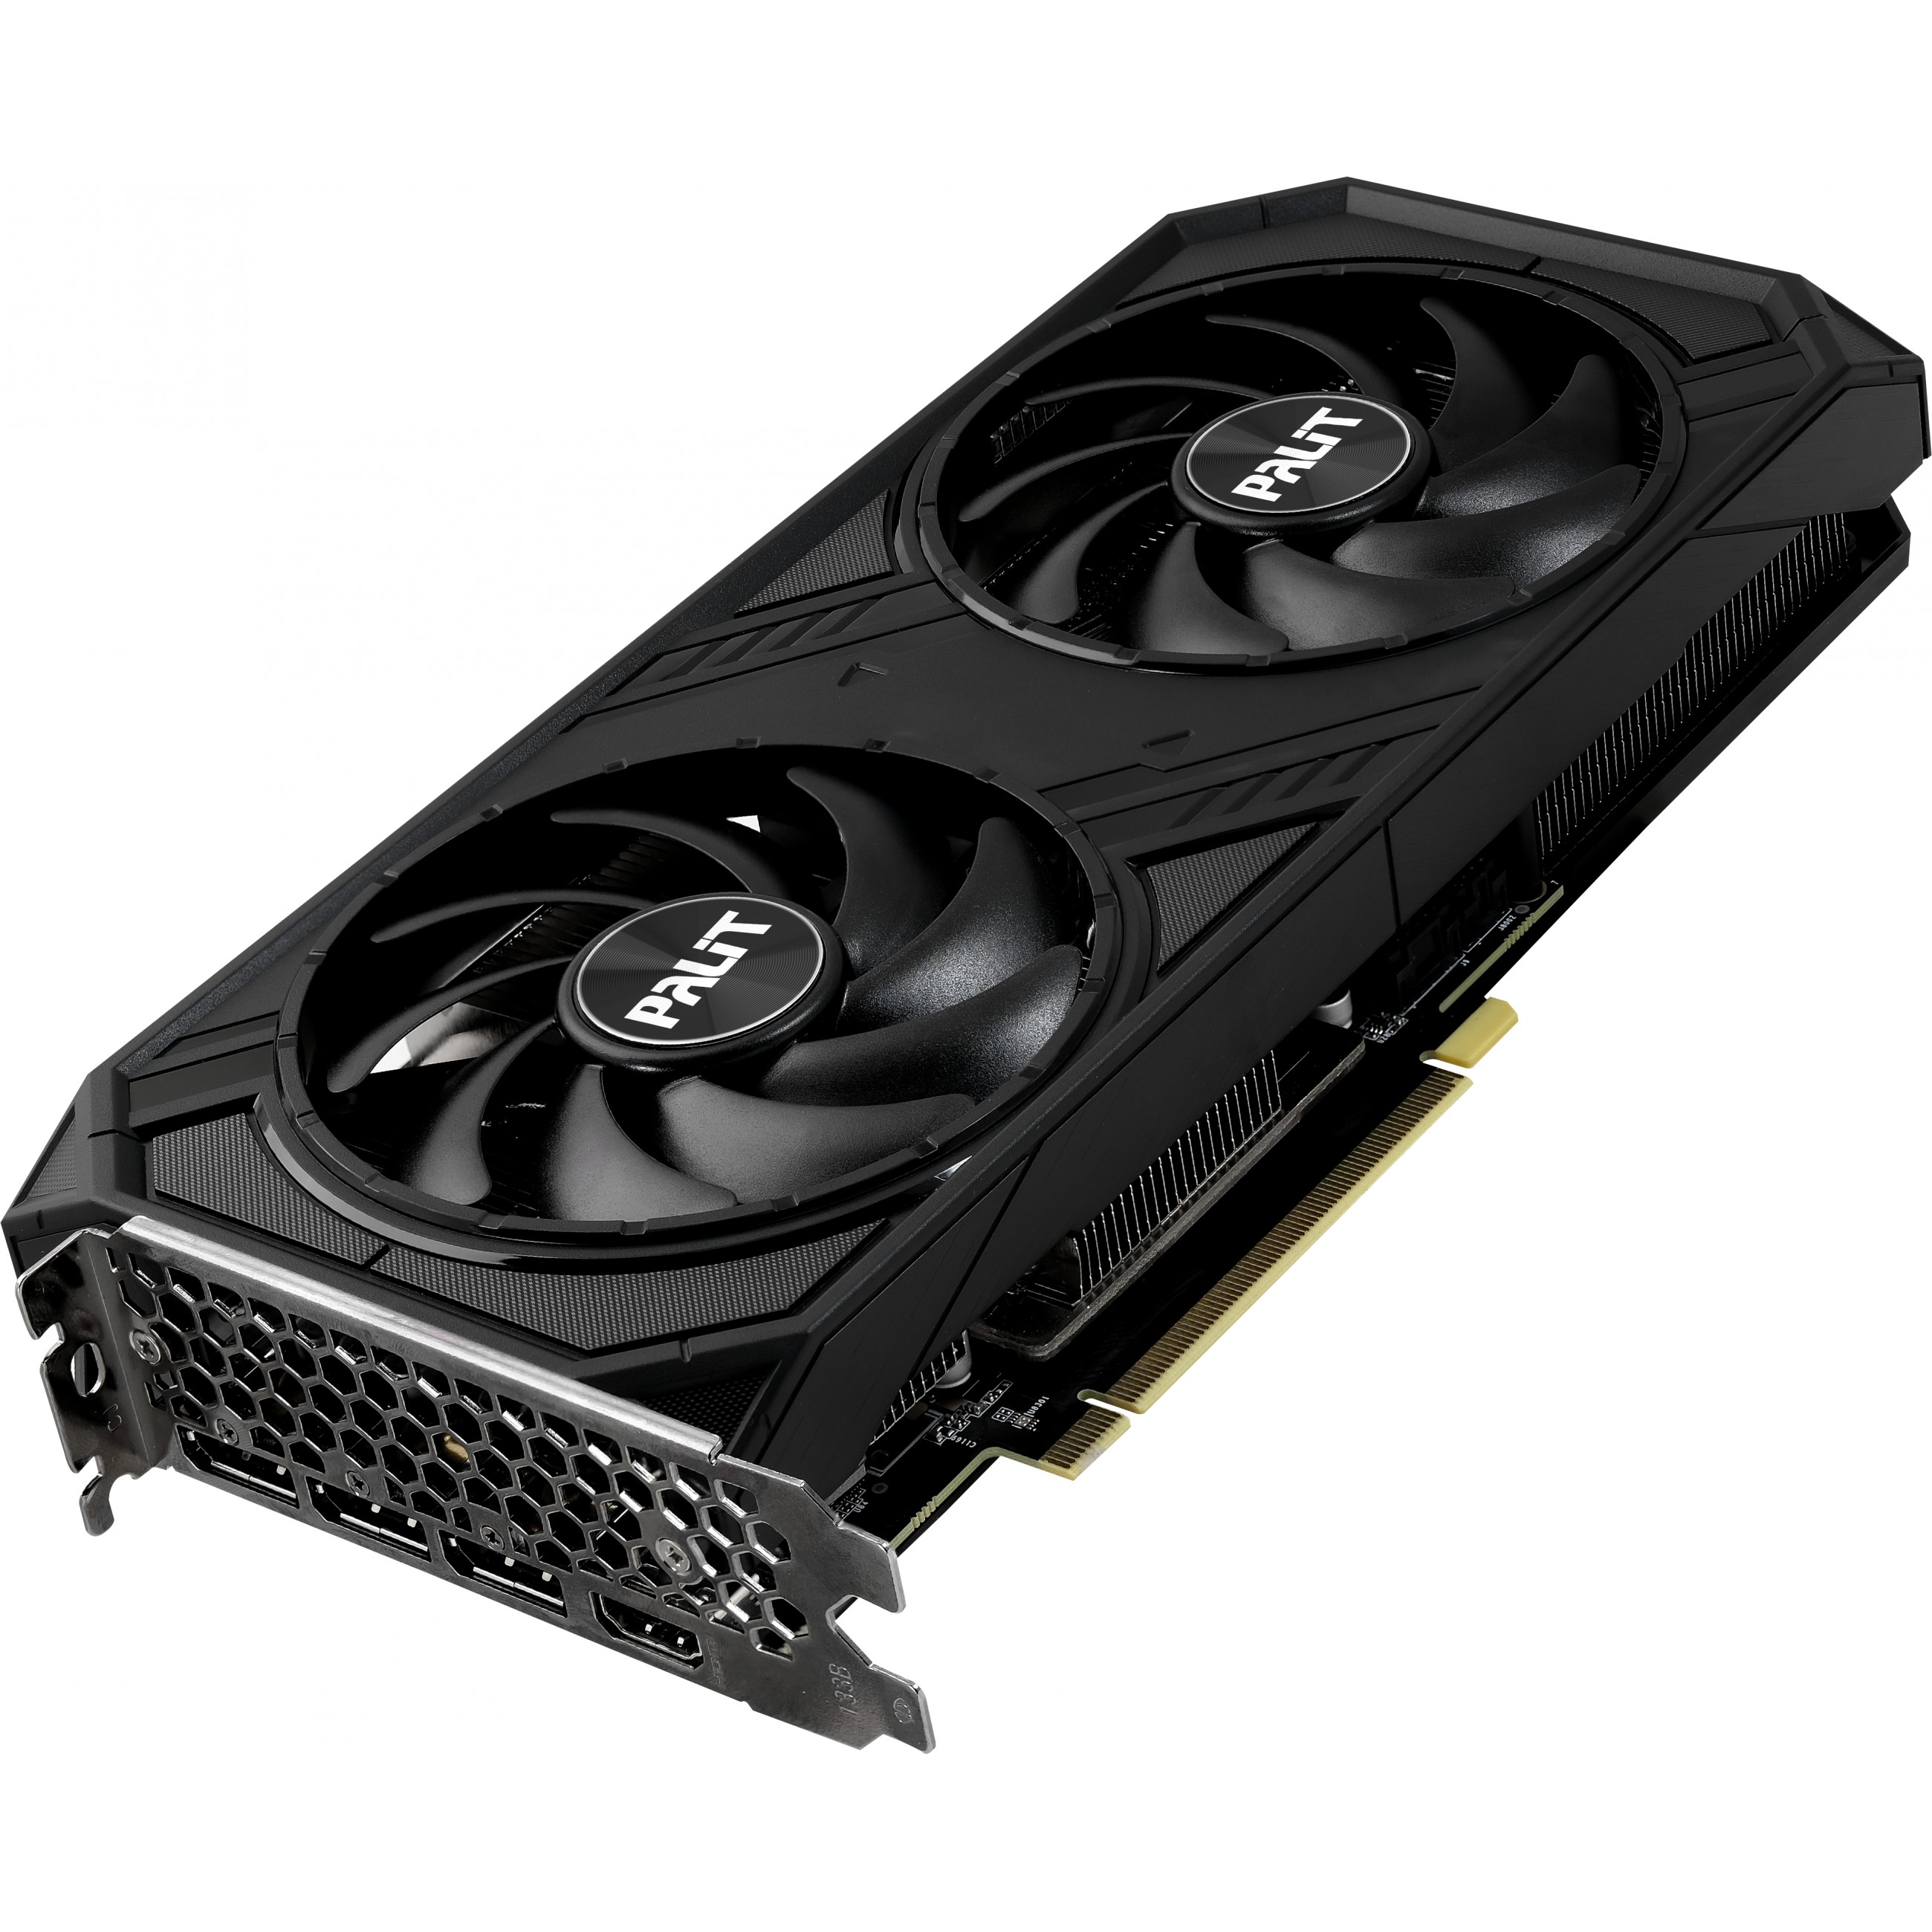 Palit NED4070019K9-1047D graphics card